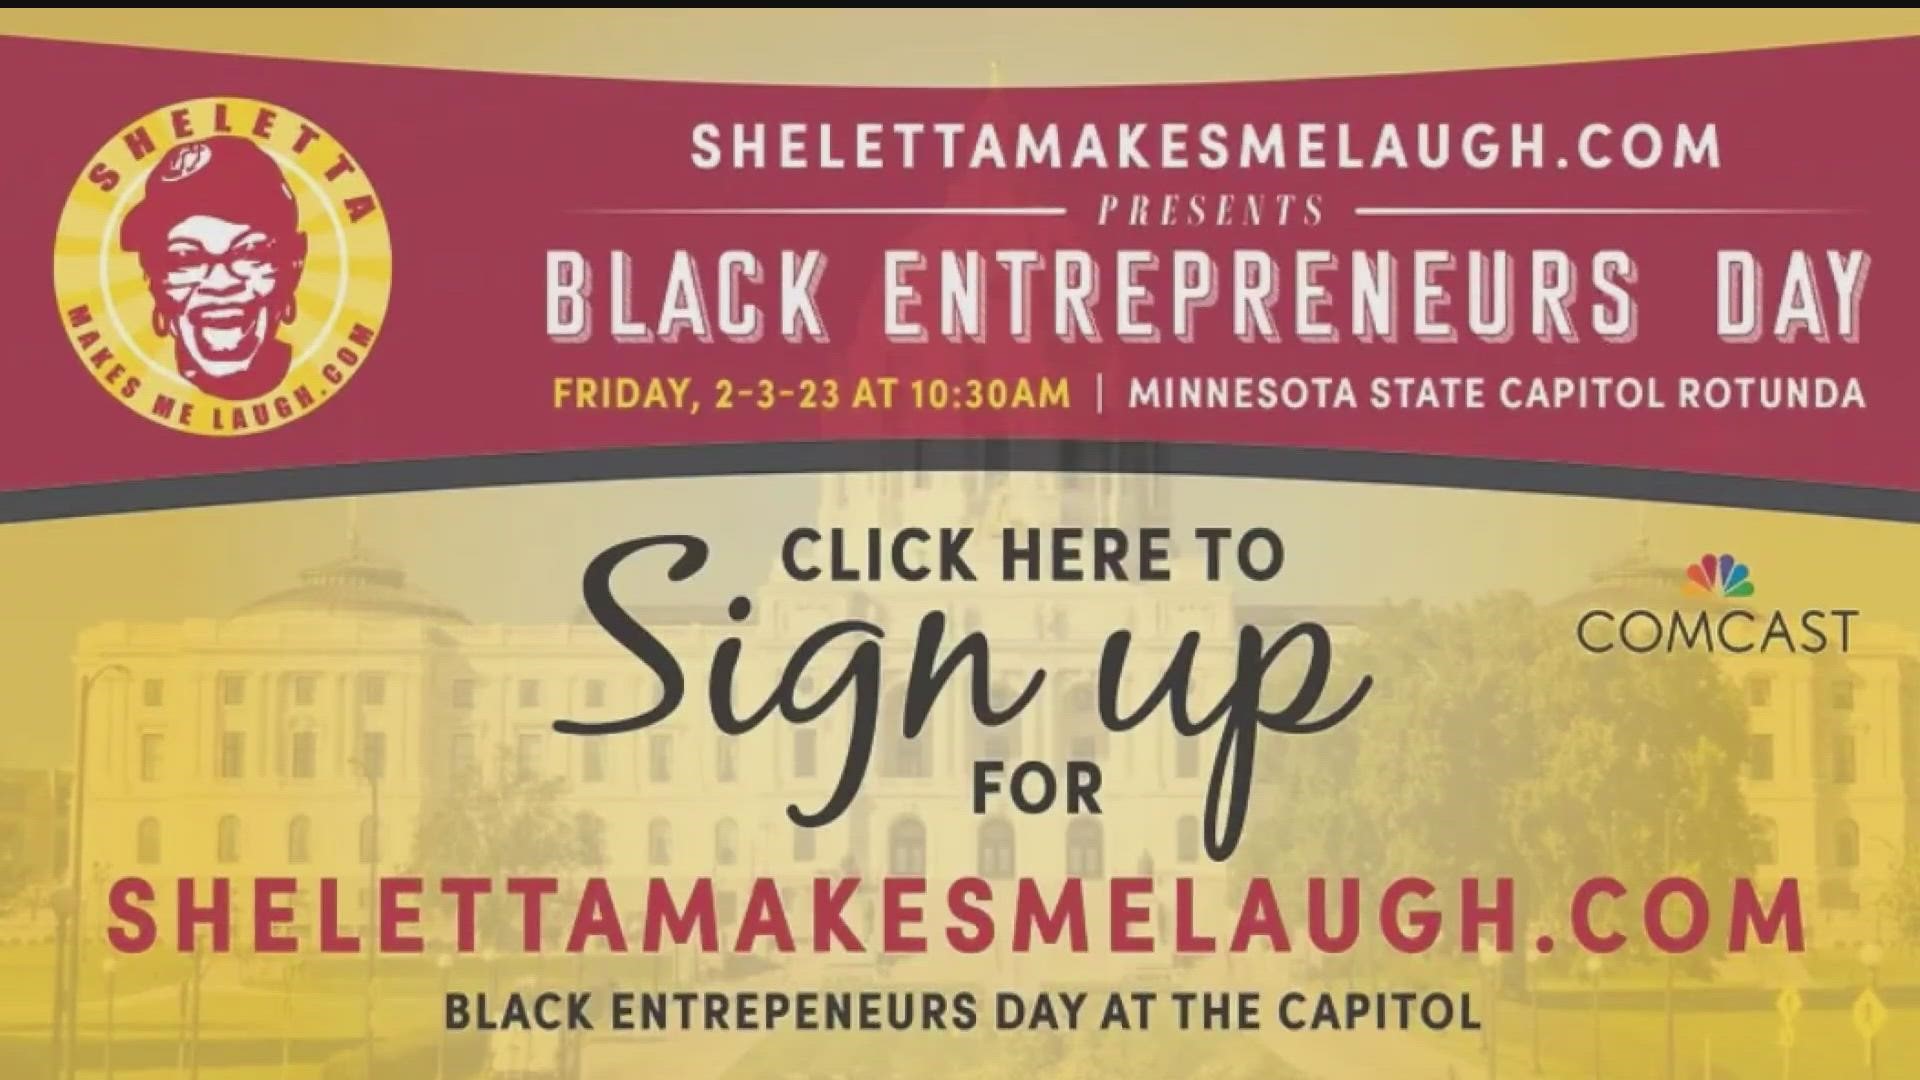 Twin Cities comedian and activist Sheletta Brundidge is producing Black Entrepreneurs Day at the Capitol, an event that will draw hundreds to St. Paul Friday morning